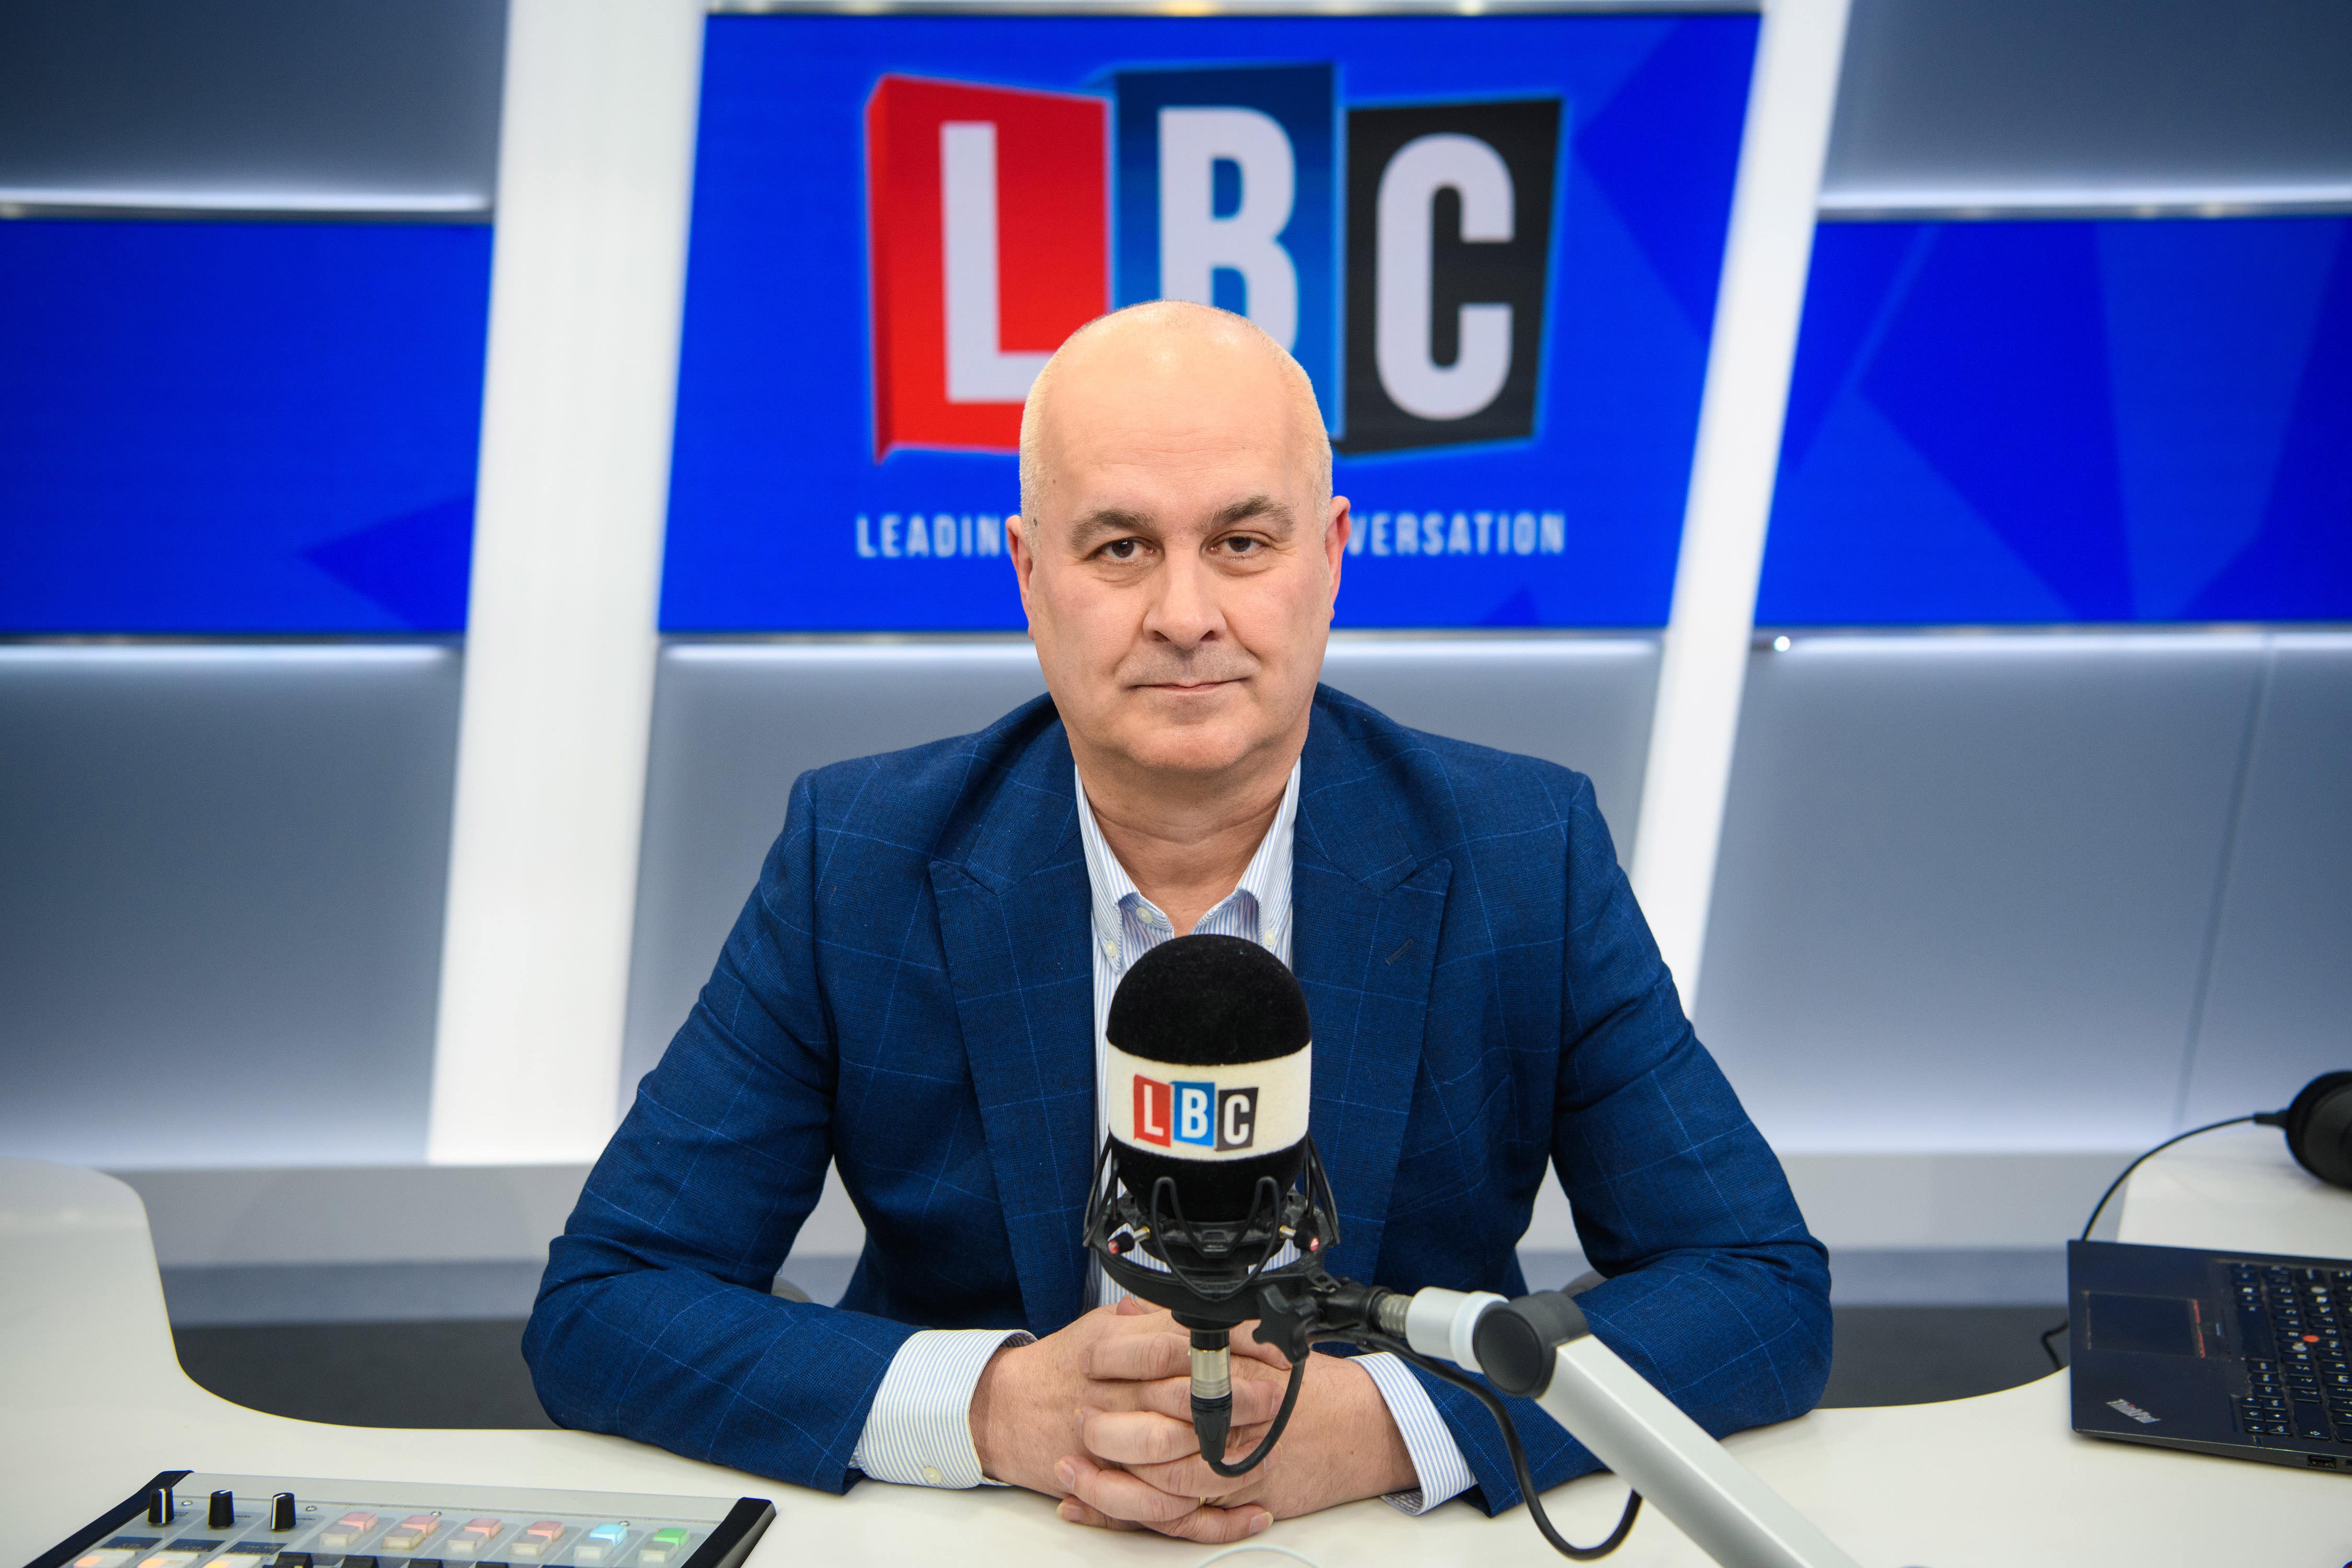 Iain Dale is no longer standing to be an MP